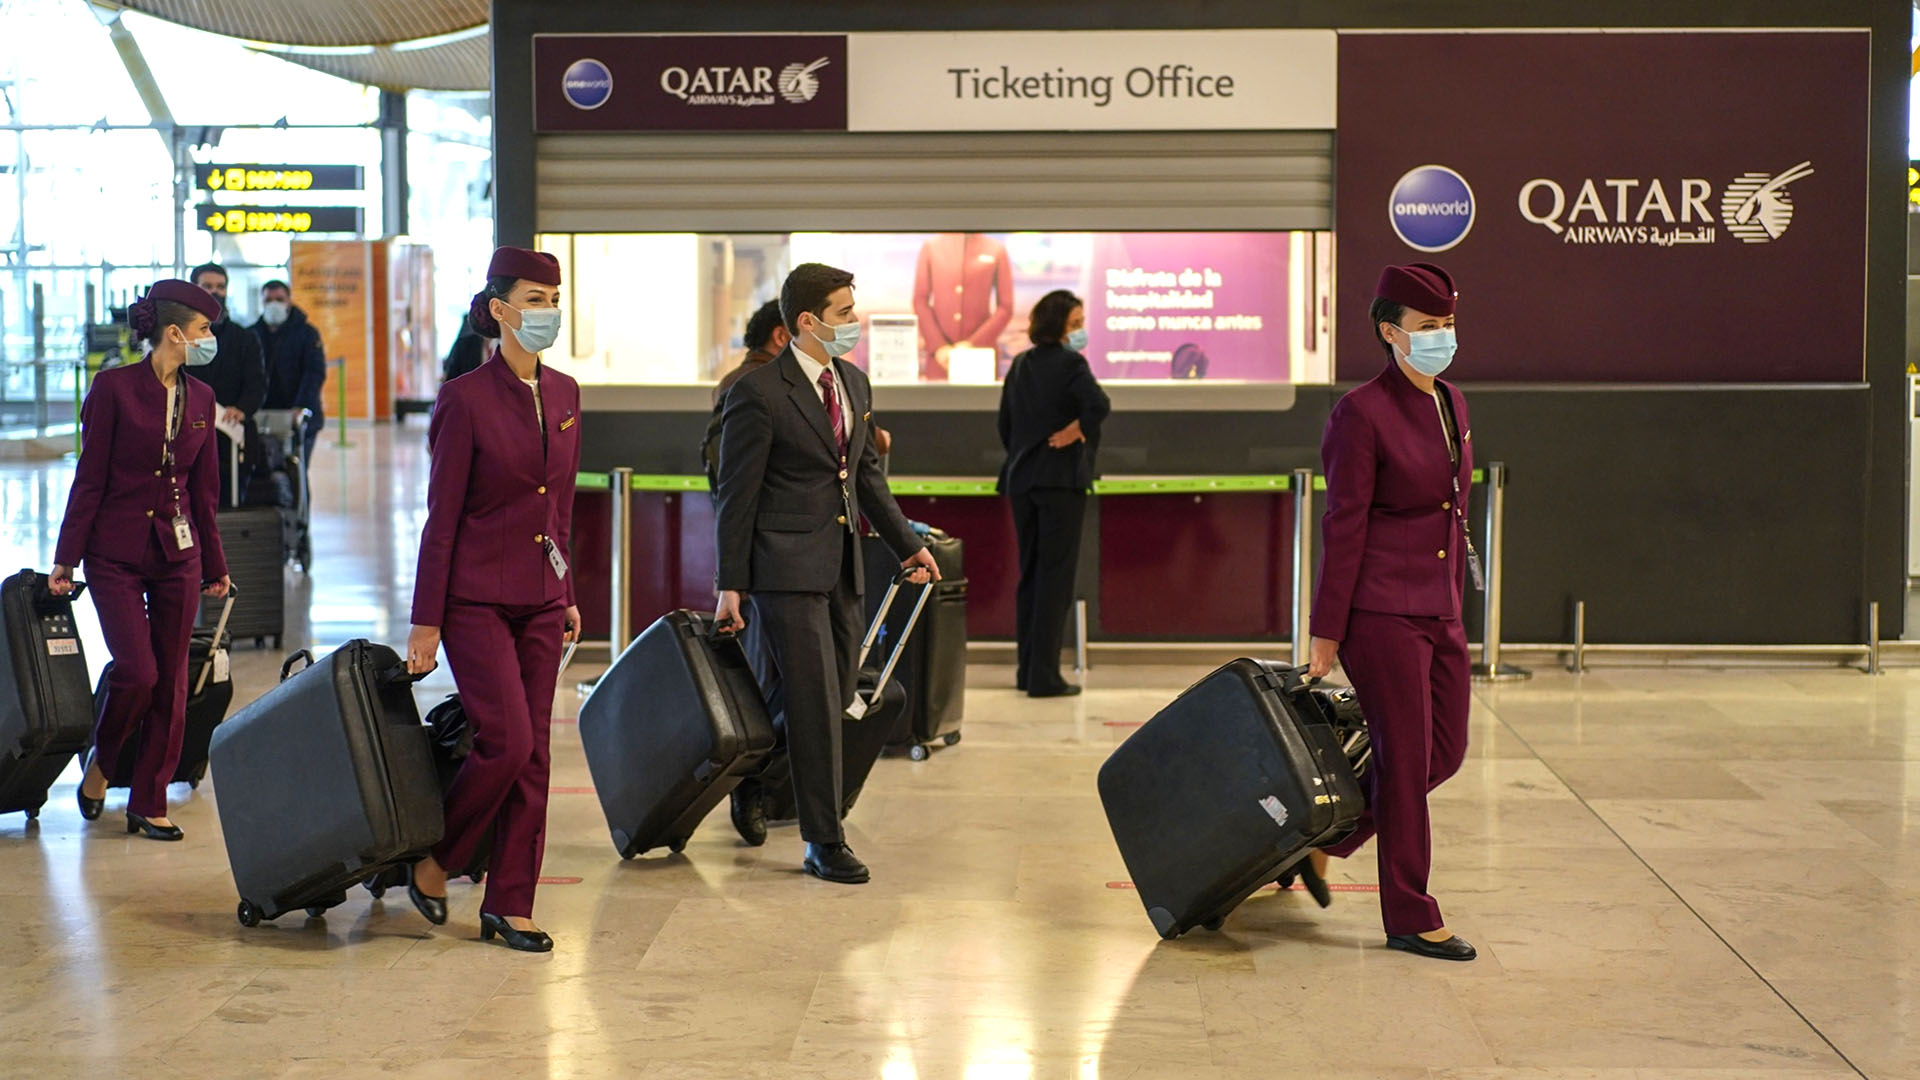 Flight attendants and crew from Qatar Airways wheel luggage through the departures hall at Madrid Barajas airport, operated by Aena SA, in Madrid, Spain, on Thursday, Dec. 24, 2020. The coronavirus pandemic left fleets of planes grounded and caused air passenger traffic to slump as much as 94%. Photographer: Paul Hanna/Bloomberg